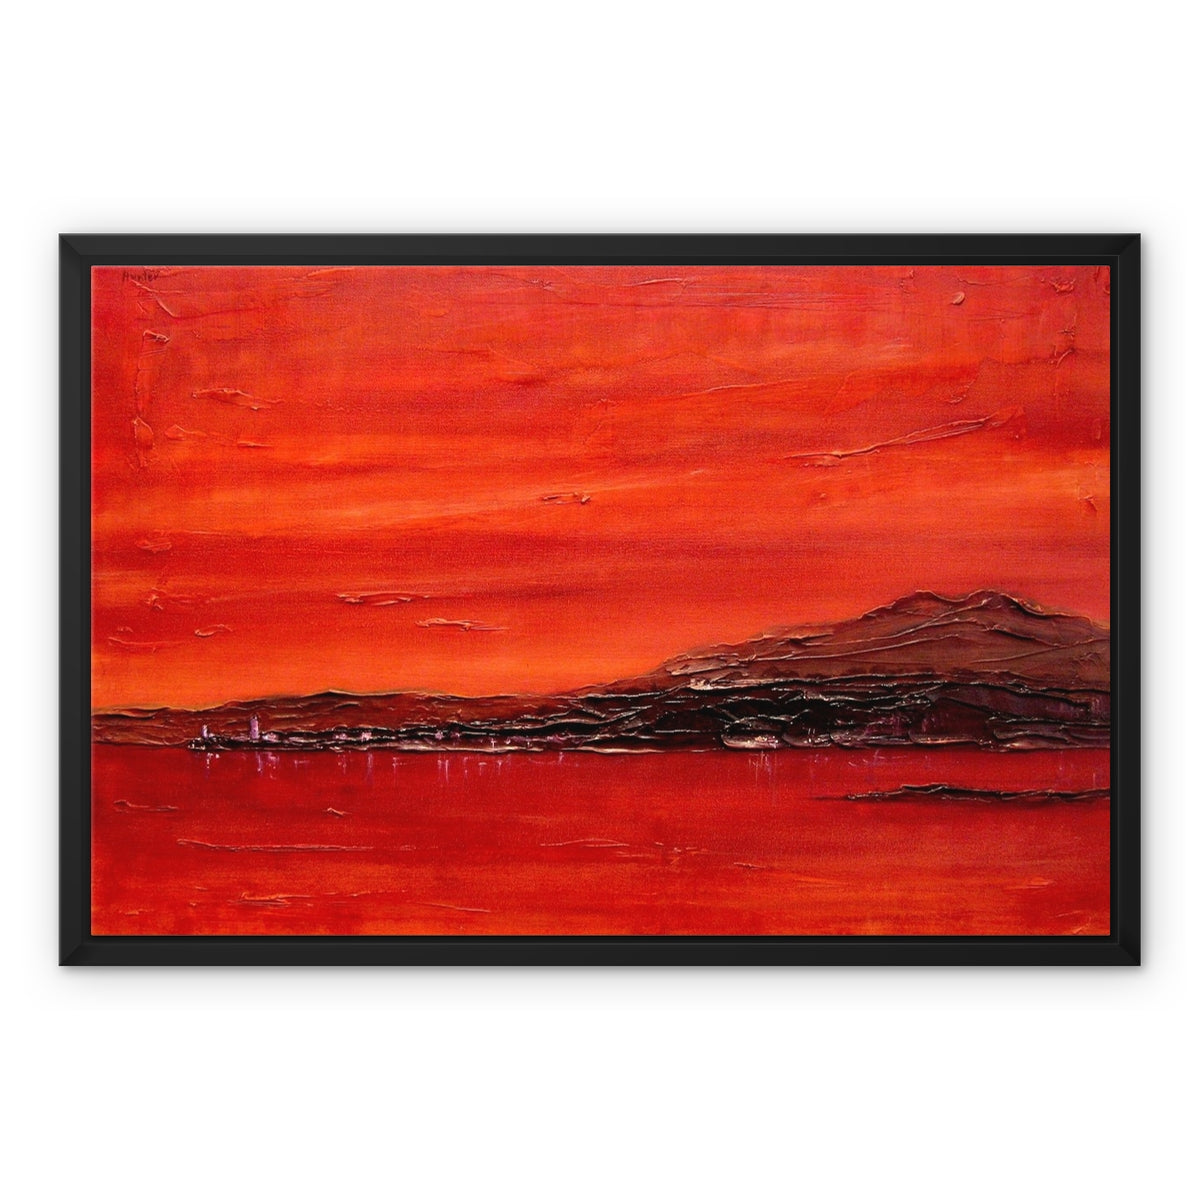 Toward Point Lighthouse Sunset Painting | Framed Canvas From Scotland-Floating Framed Canvas Prints-Arran Art Gallery-24"x18"-Black Frame-Paintings, Prints, Homeware, Art Gifts From Scotland By Scottish Artist Kevin Hunter